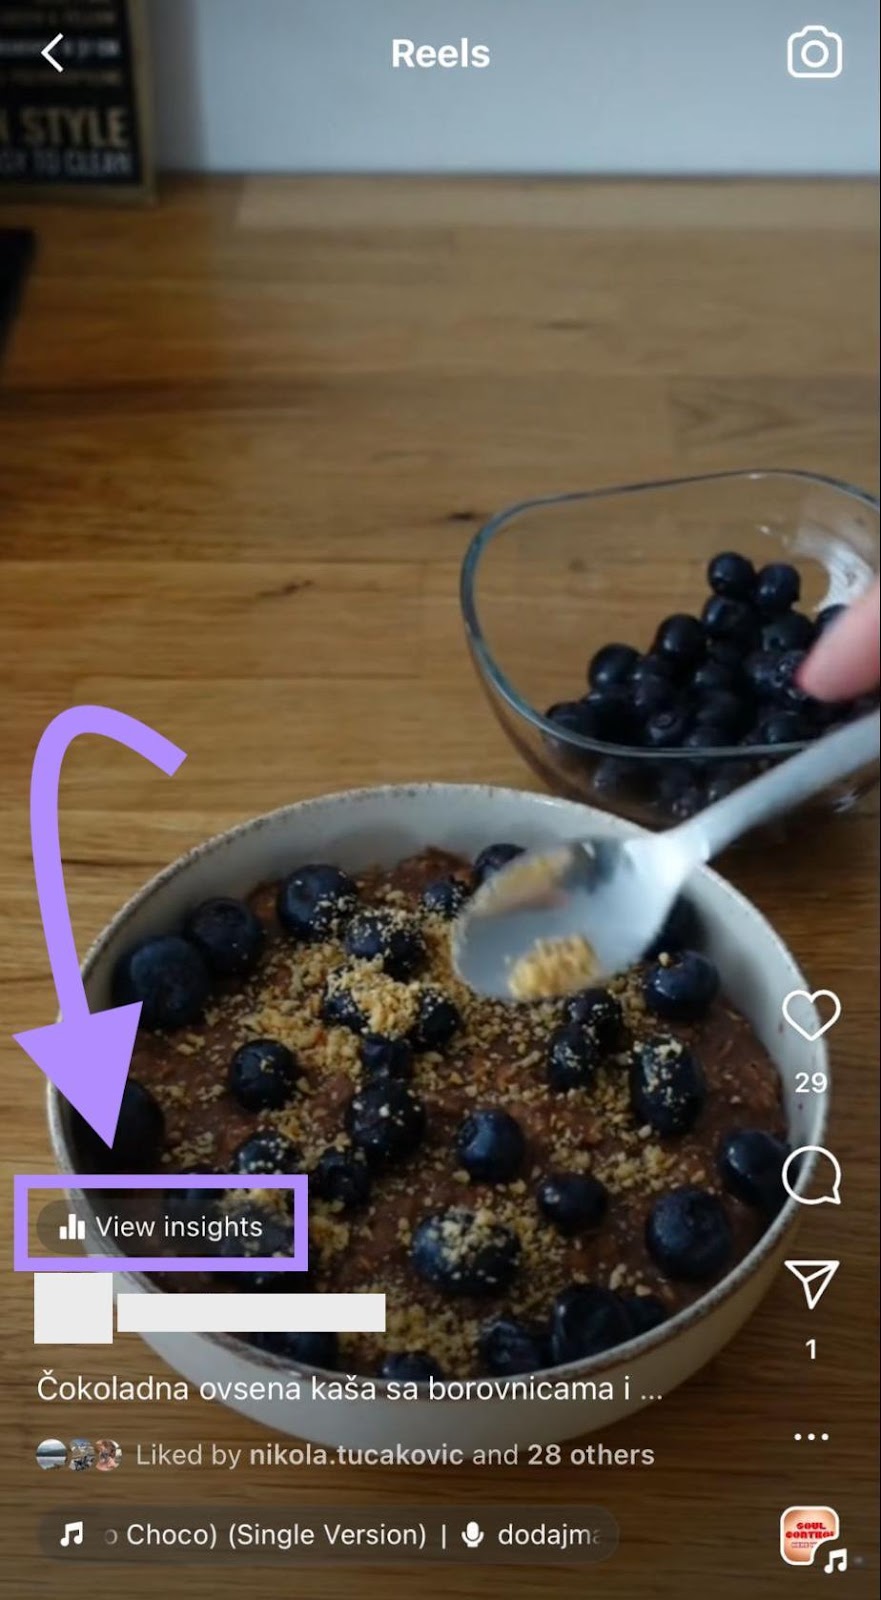 “View insights” button highlighted in the opened Instagram Reel